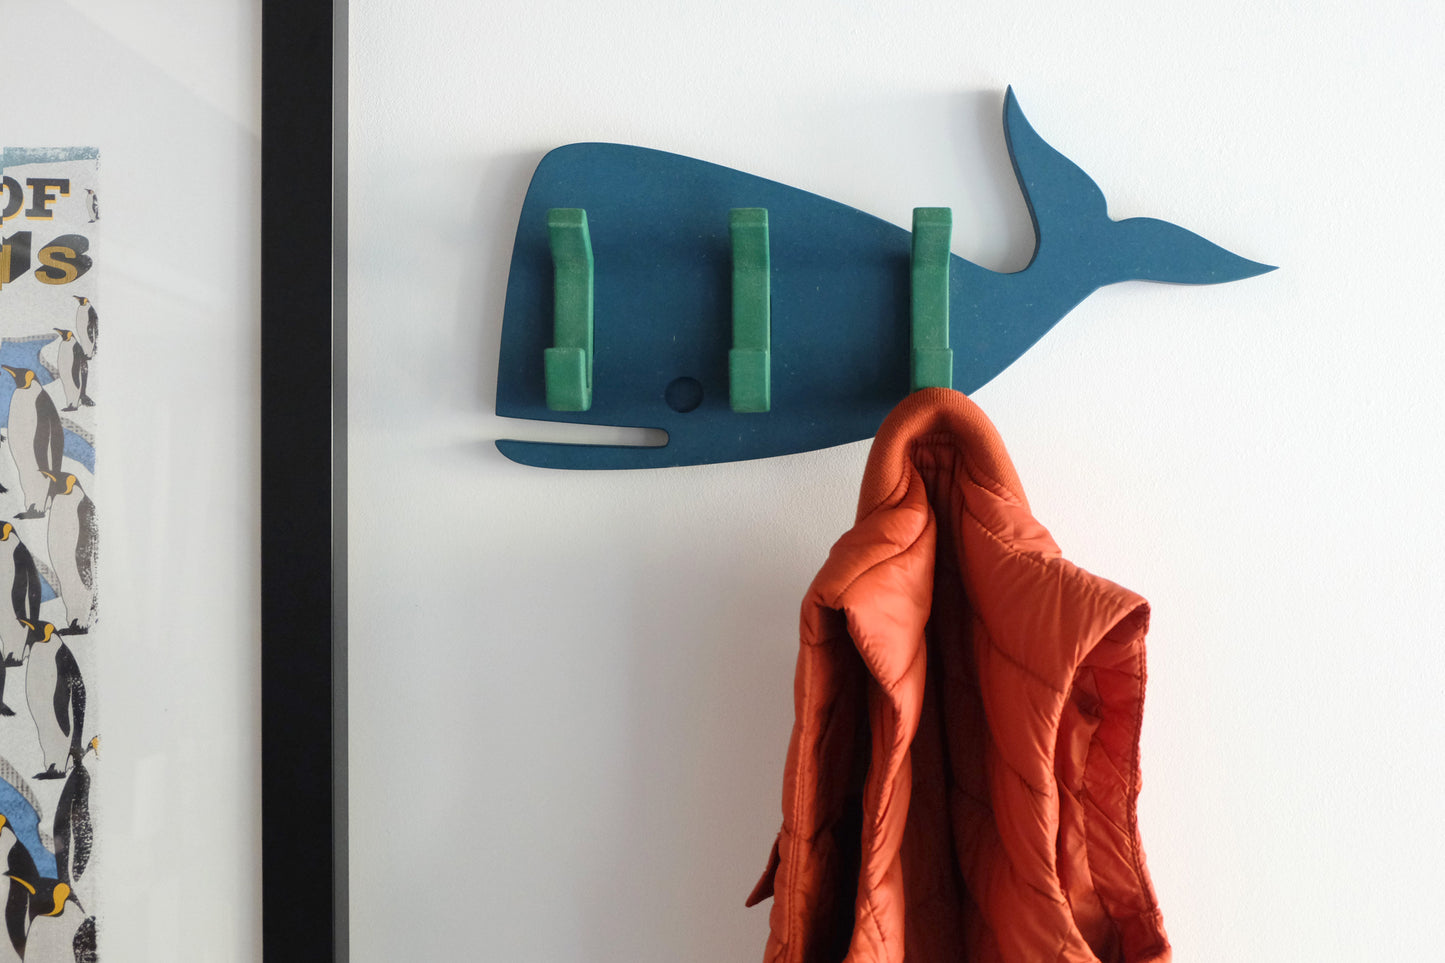 Ocean whale wall hook from SARUS ORIGINALS - contemporary and functional wall art made in England from eco friendlyValchromat. Fun colourful colorful kids bedroom decoration decor